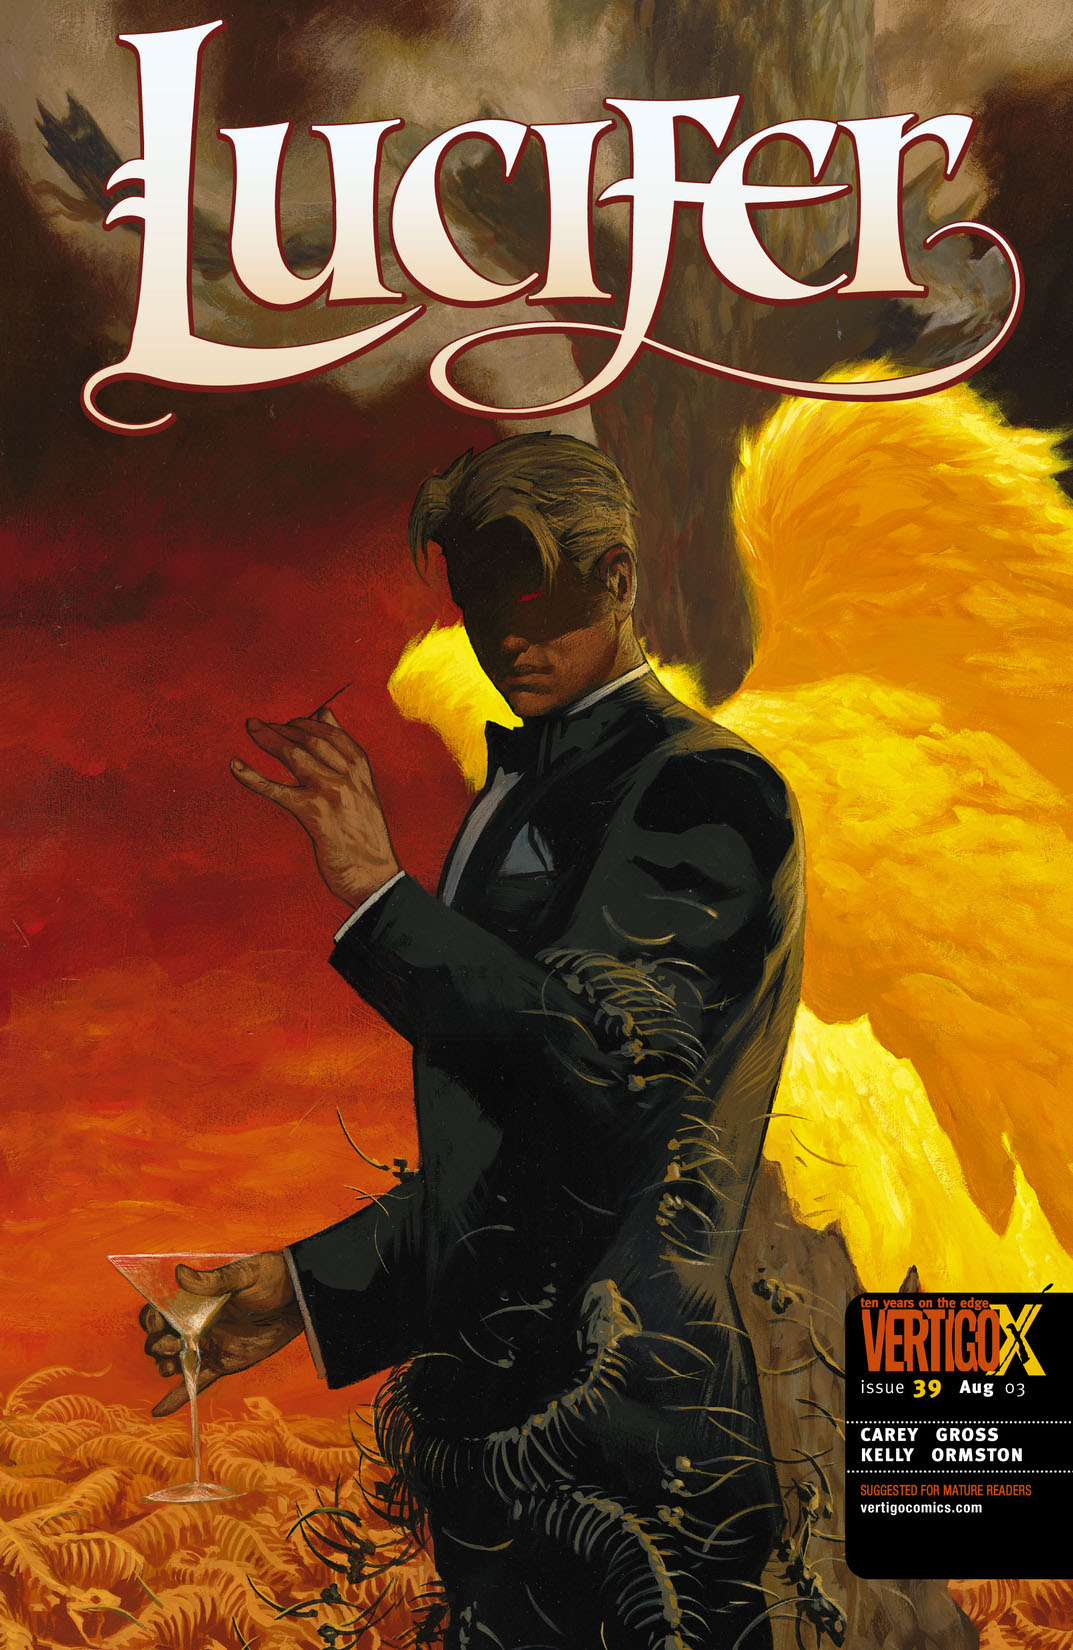 Lucifer #39 preview images